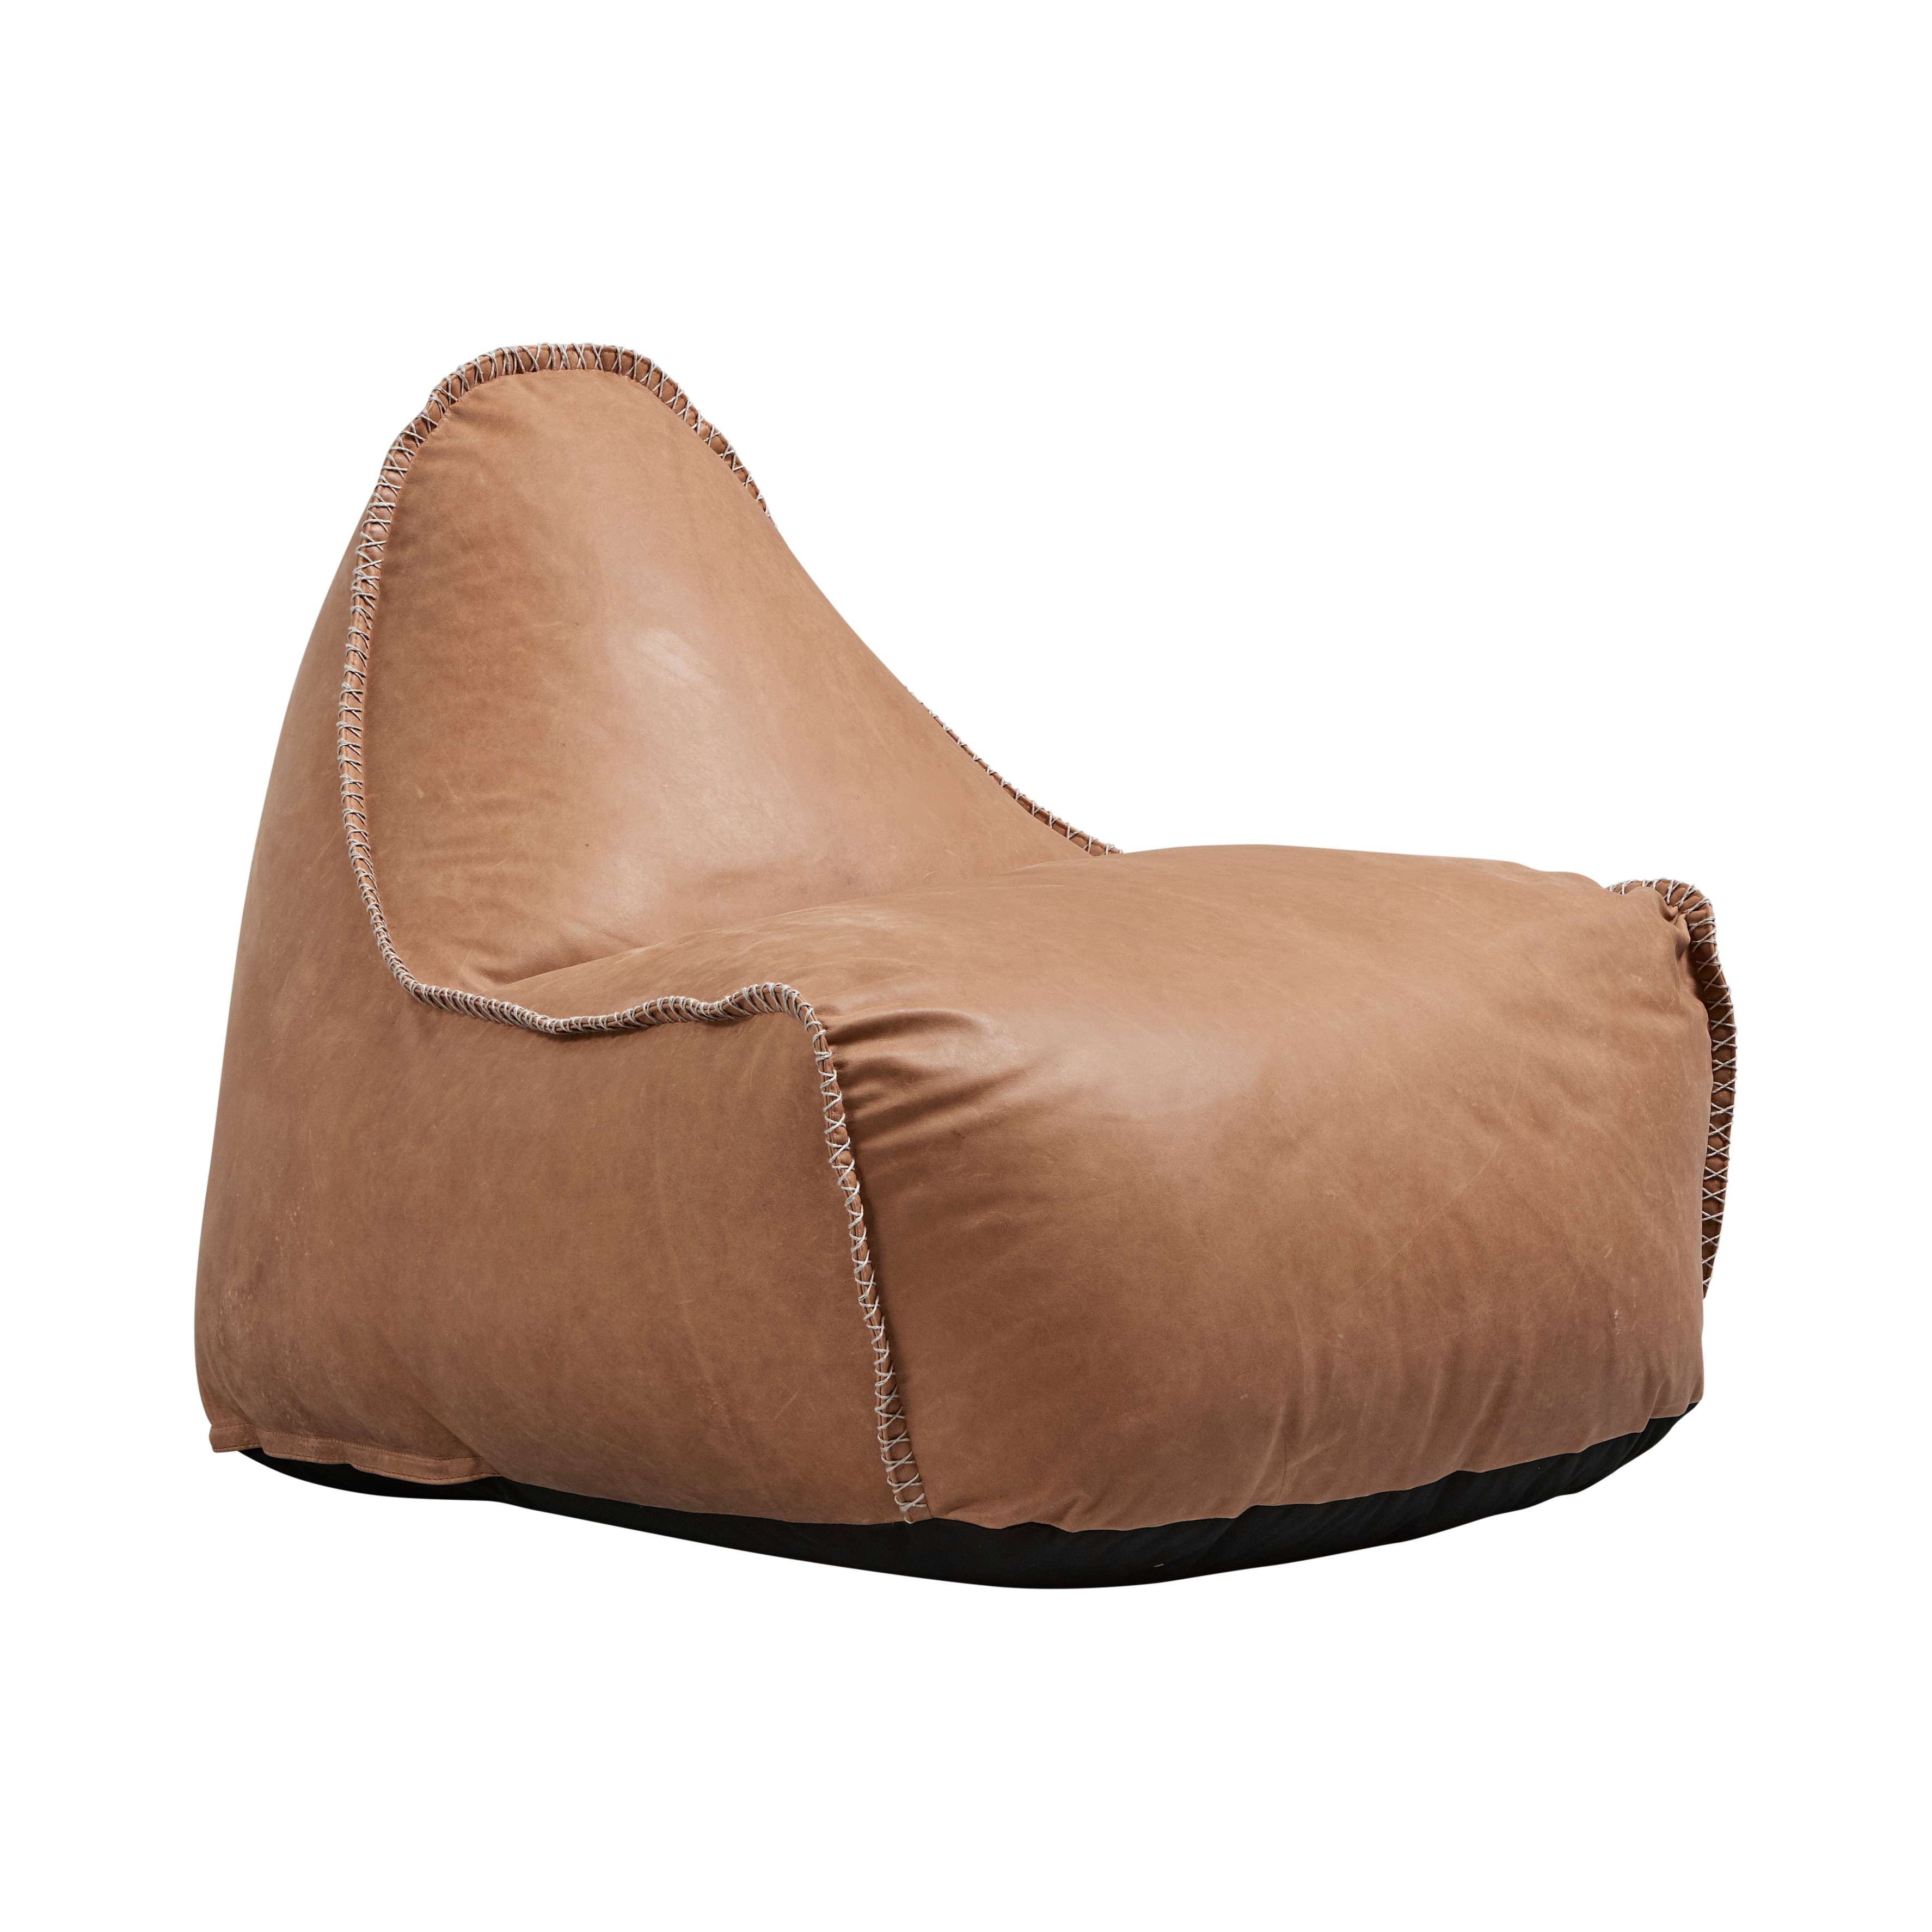 SACKit Dunes Lounge Chair, Farbe: Dunes Camel